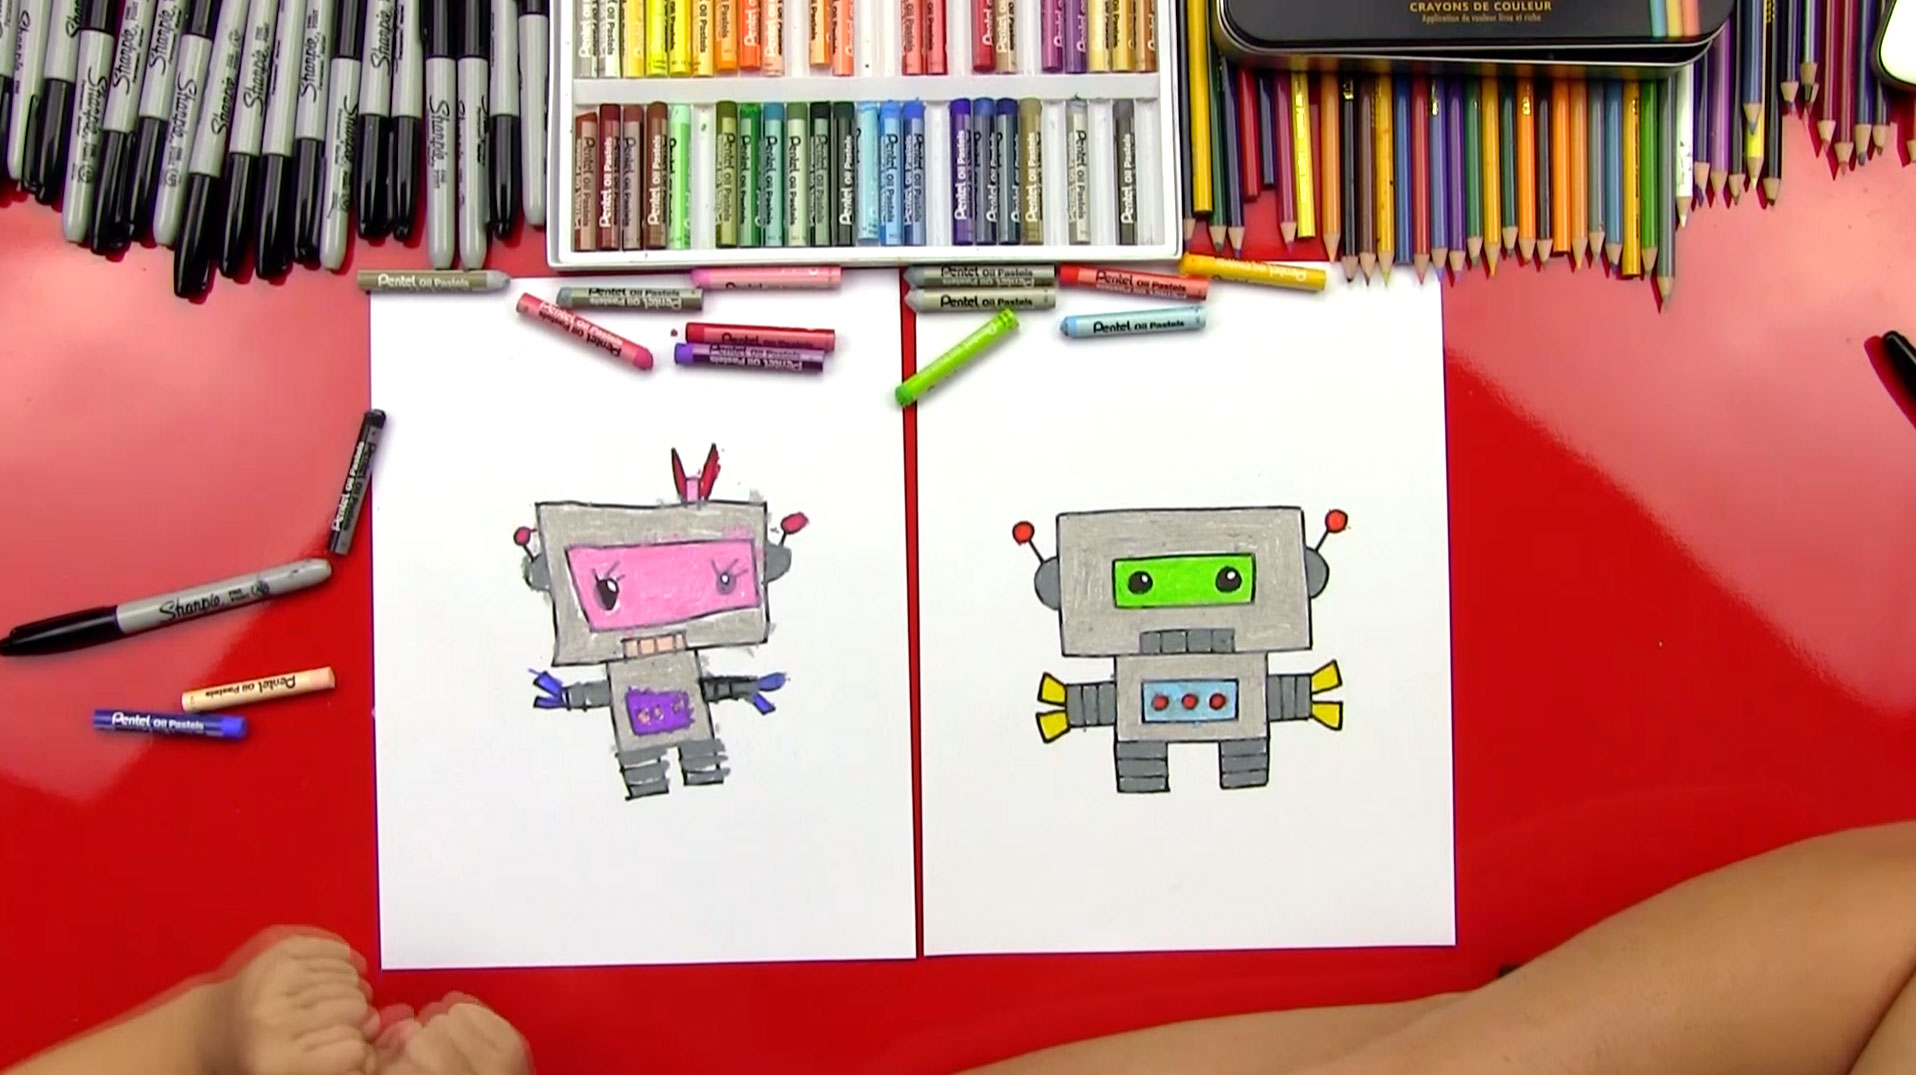 How To Draw Robot For Kids: Learn To Draw Robot | Step by Step Guide to  Drawing More Than 30 Robots For Kids and Beginners: Press, NKS Book:  9798843285036: Amazon.com: Books